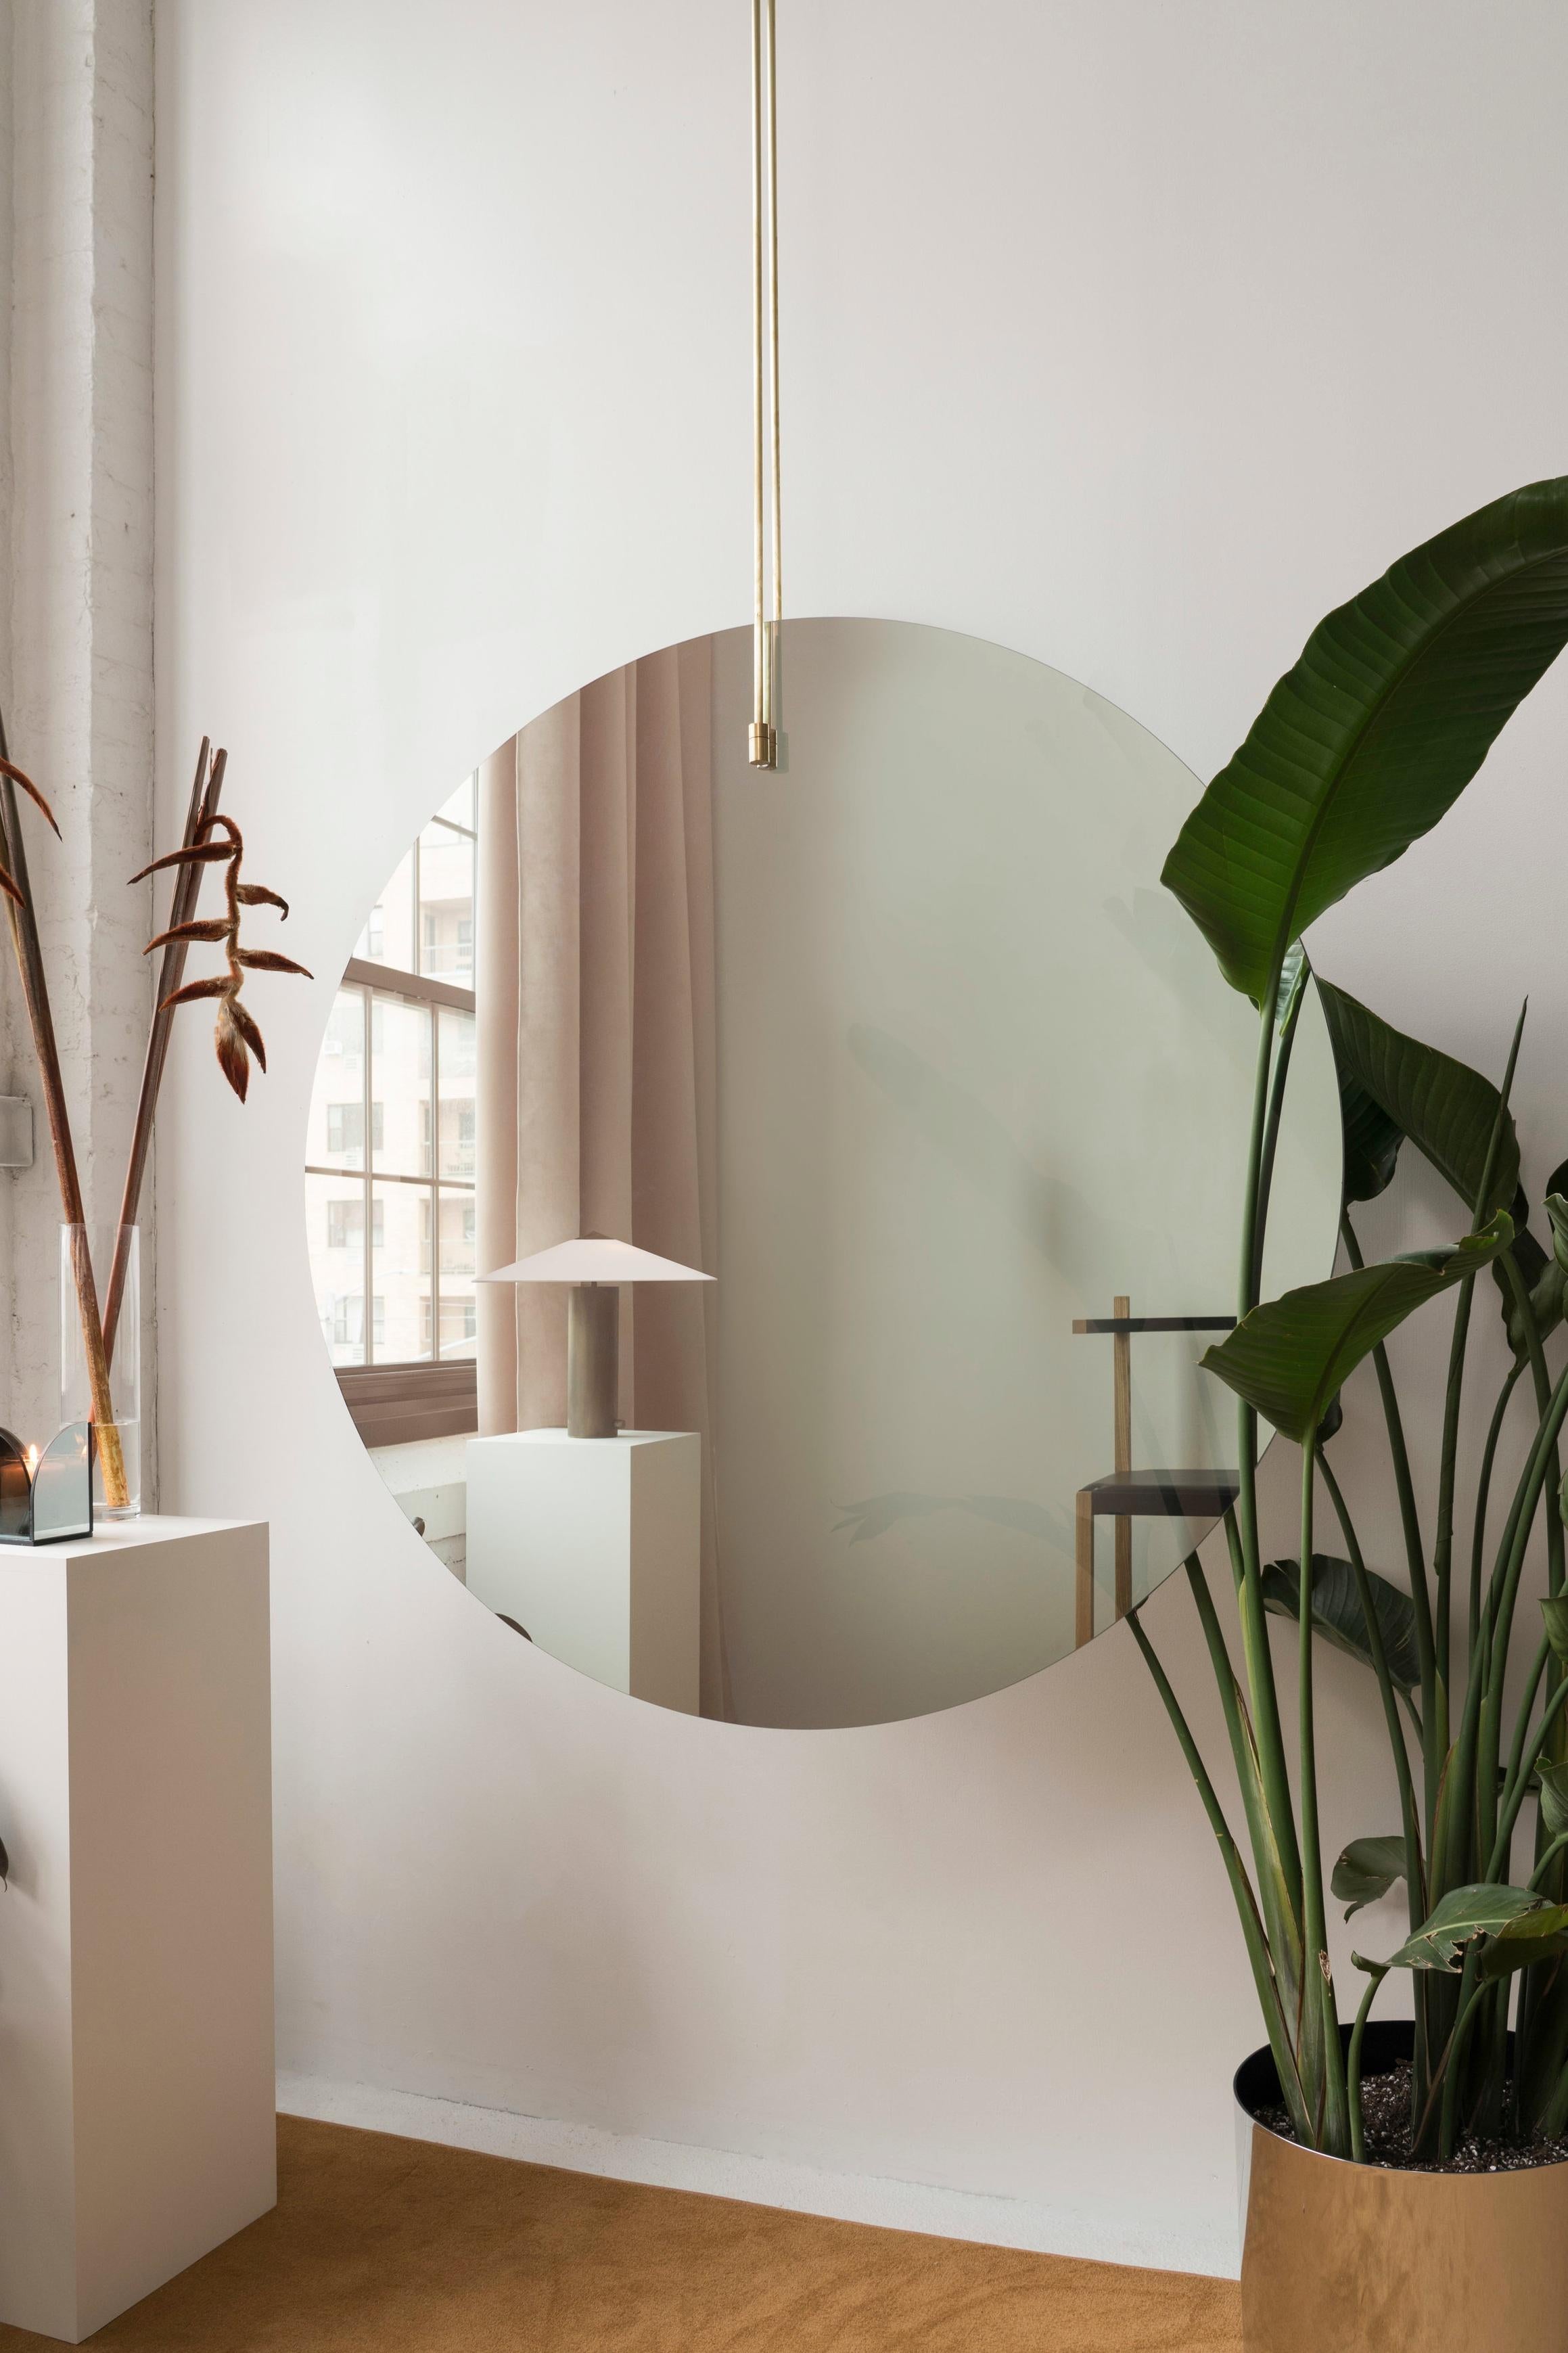 This is dramatic and bold mirror is intended to be used either as a focal point in front of a wall or window or as a sculptural room divider. Suspended from the ceiling by brushed-brass rods, it is made of one-way mirror - one side offers a slightly